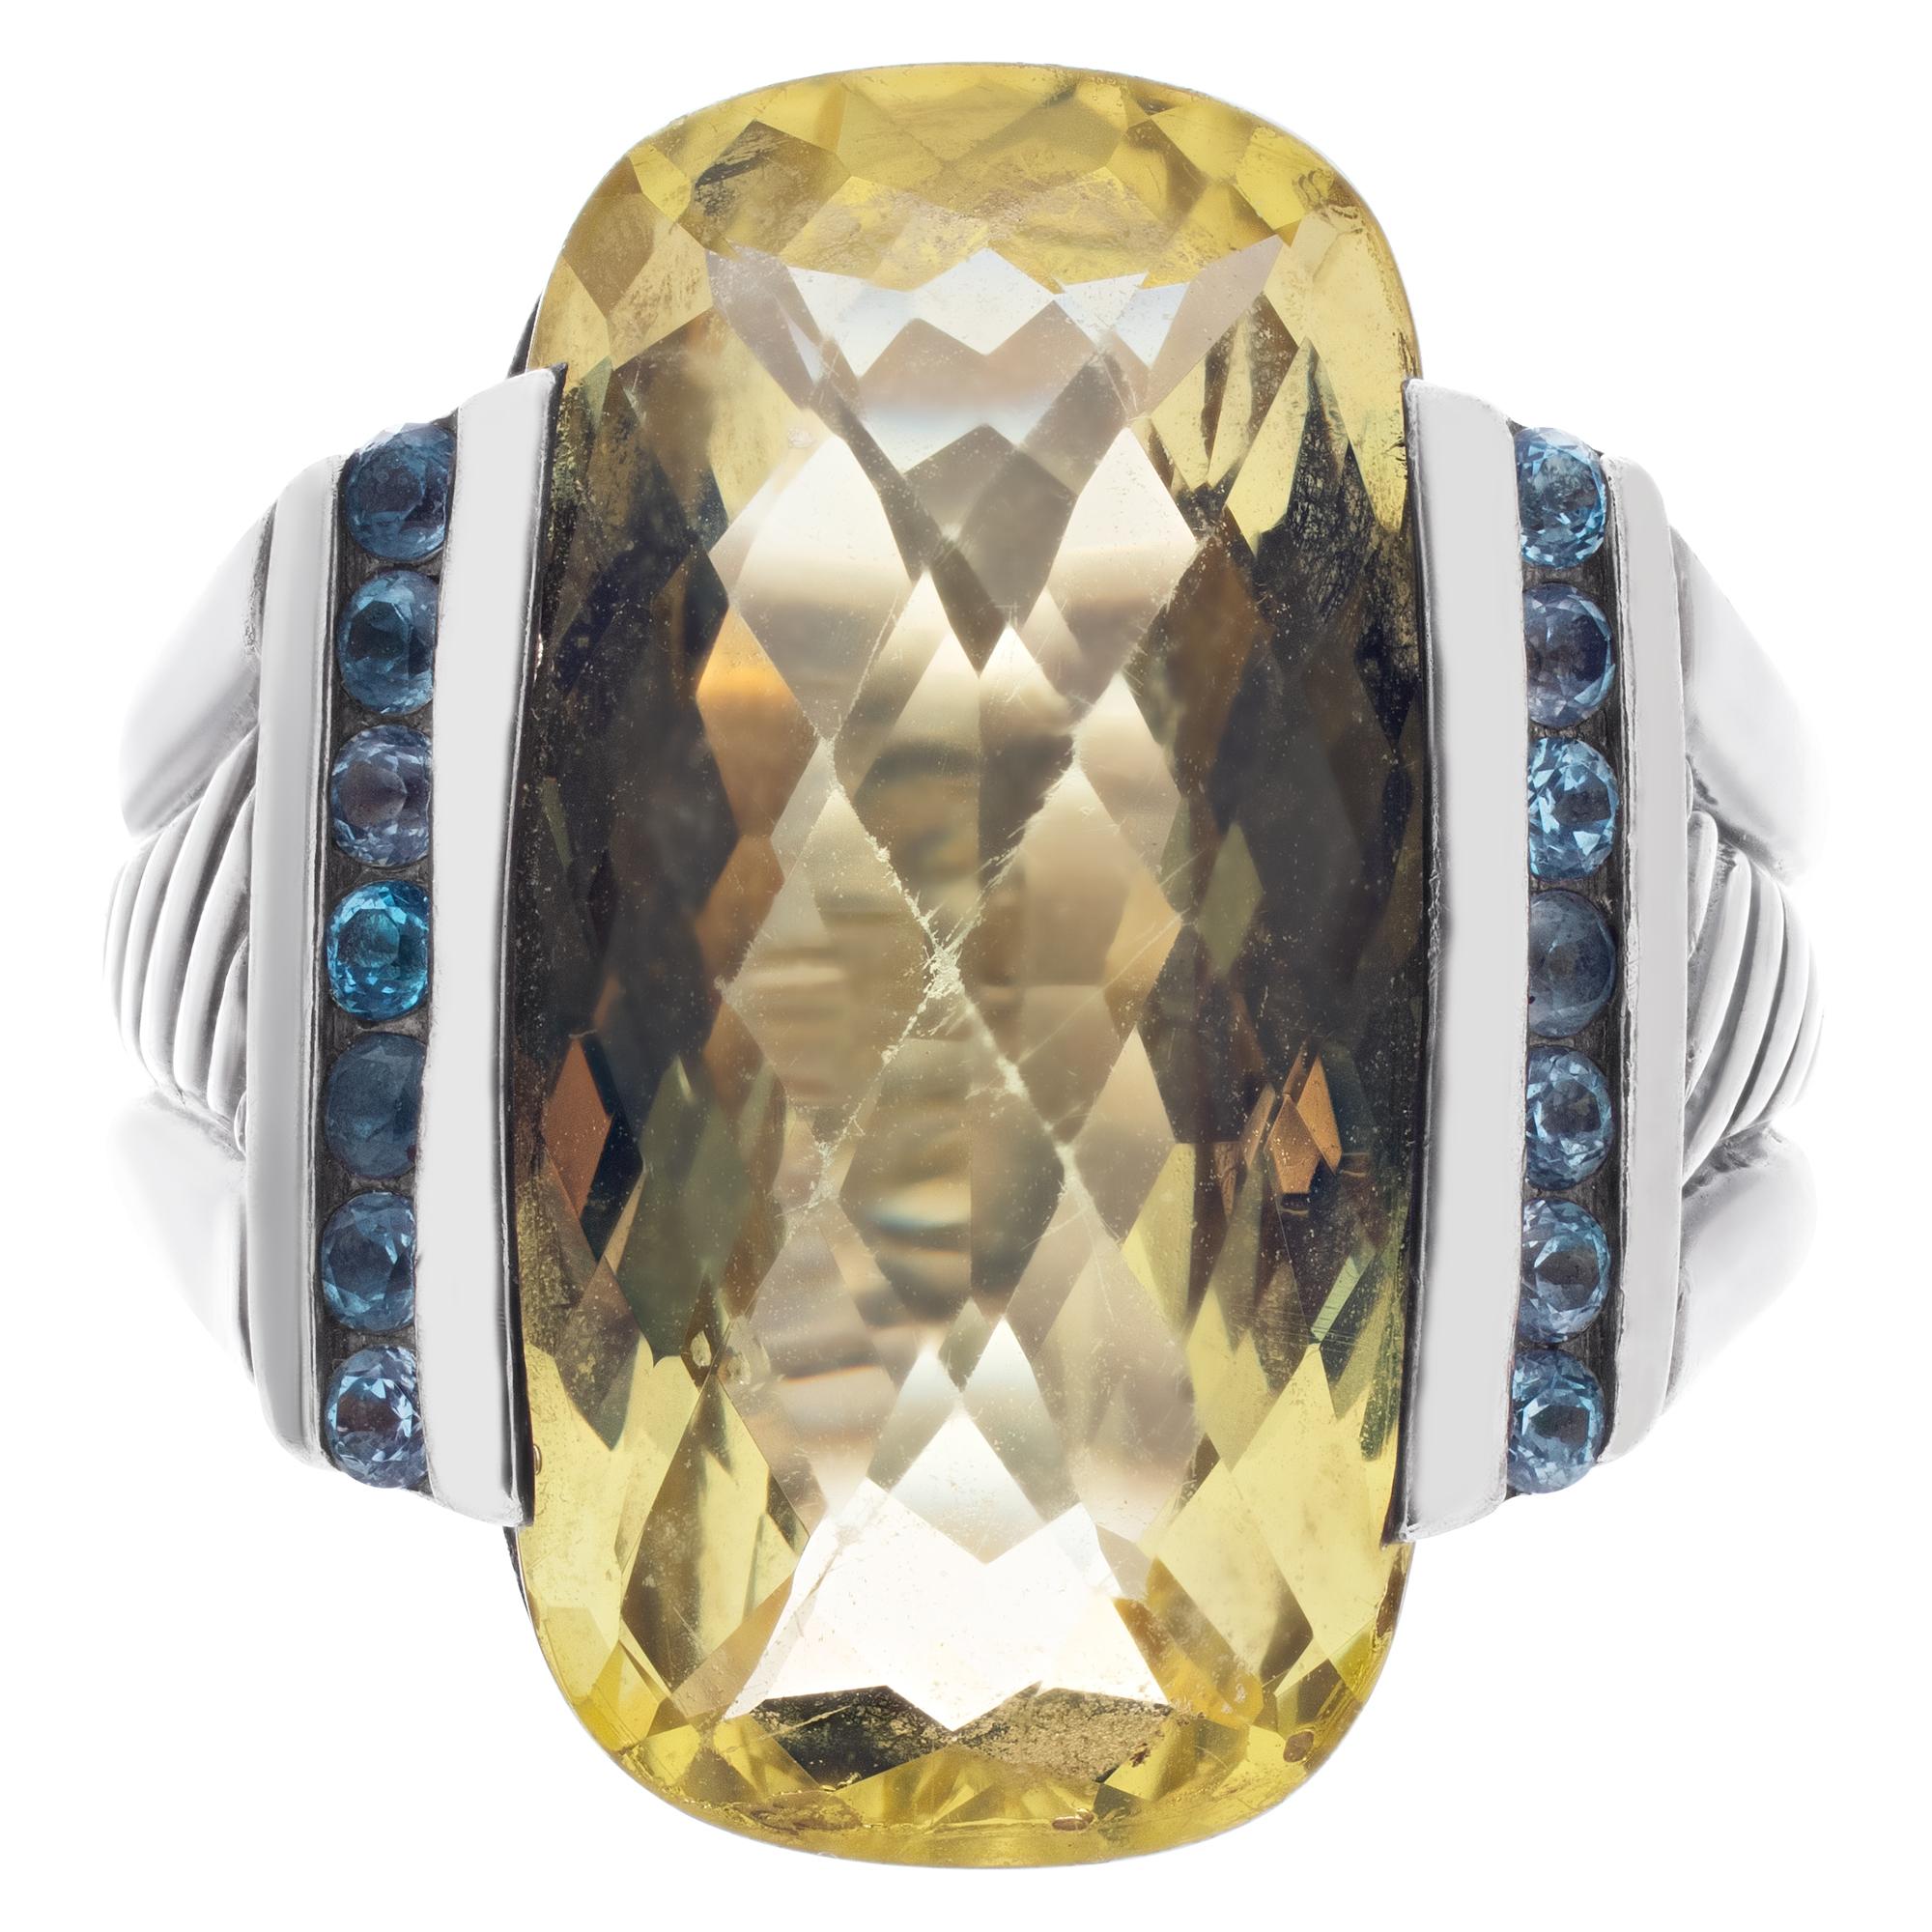 David Yurman art deco style sterling silver ring with center lemon quartz and accent blue diamonds. Size 7.25, head measures 17.5mm x 22mm, shank measures 5mm.

This David Yurman ring is currently size 7.25 and some items can be sized up or down,